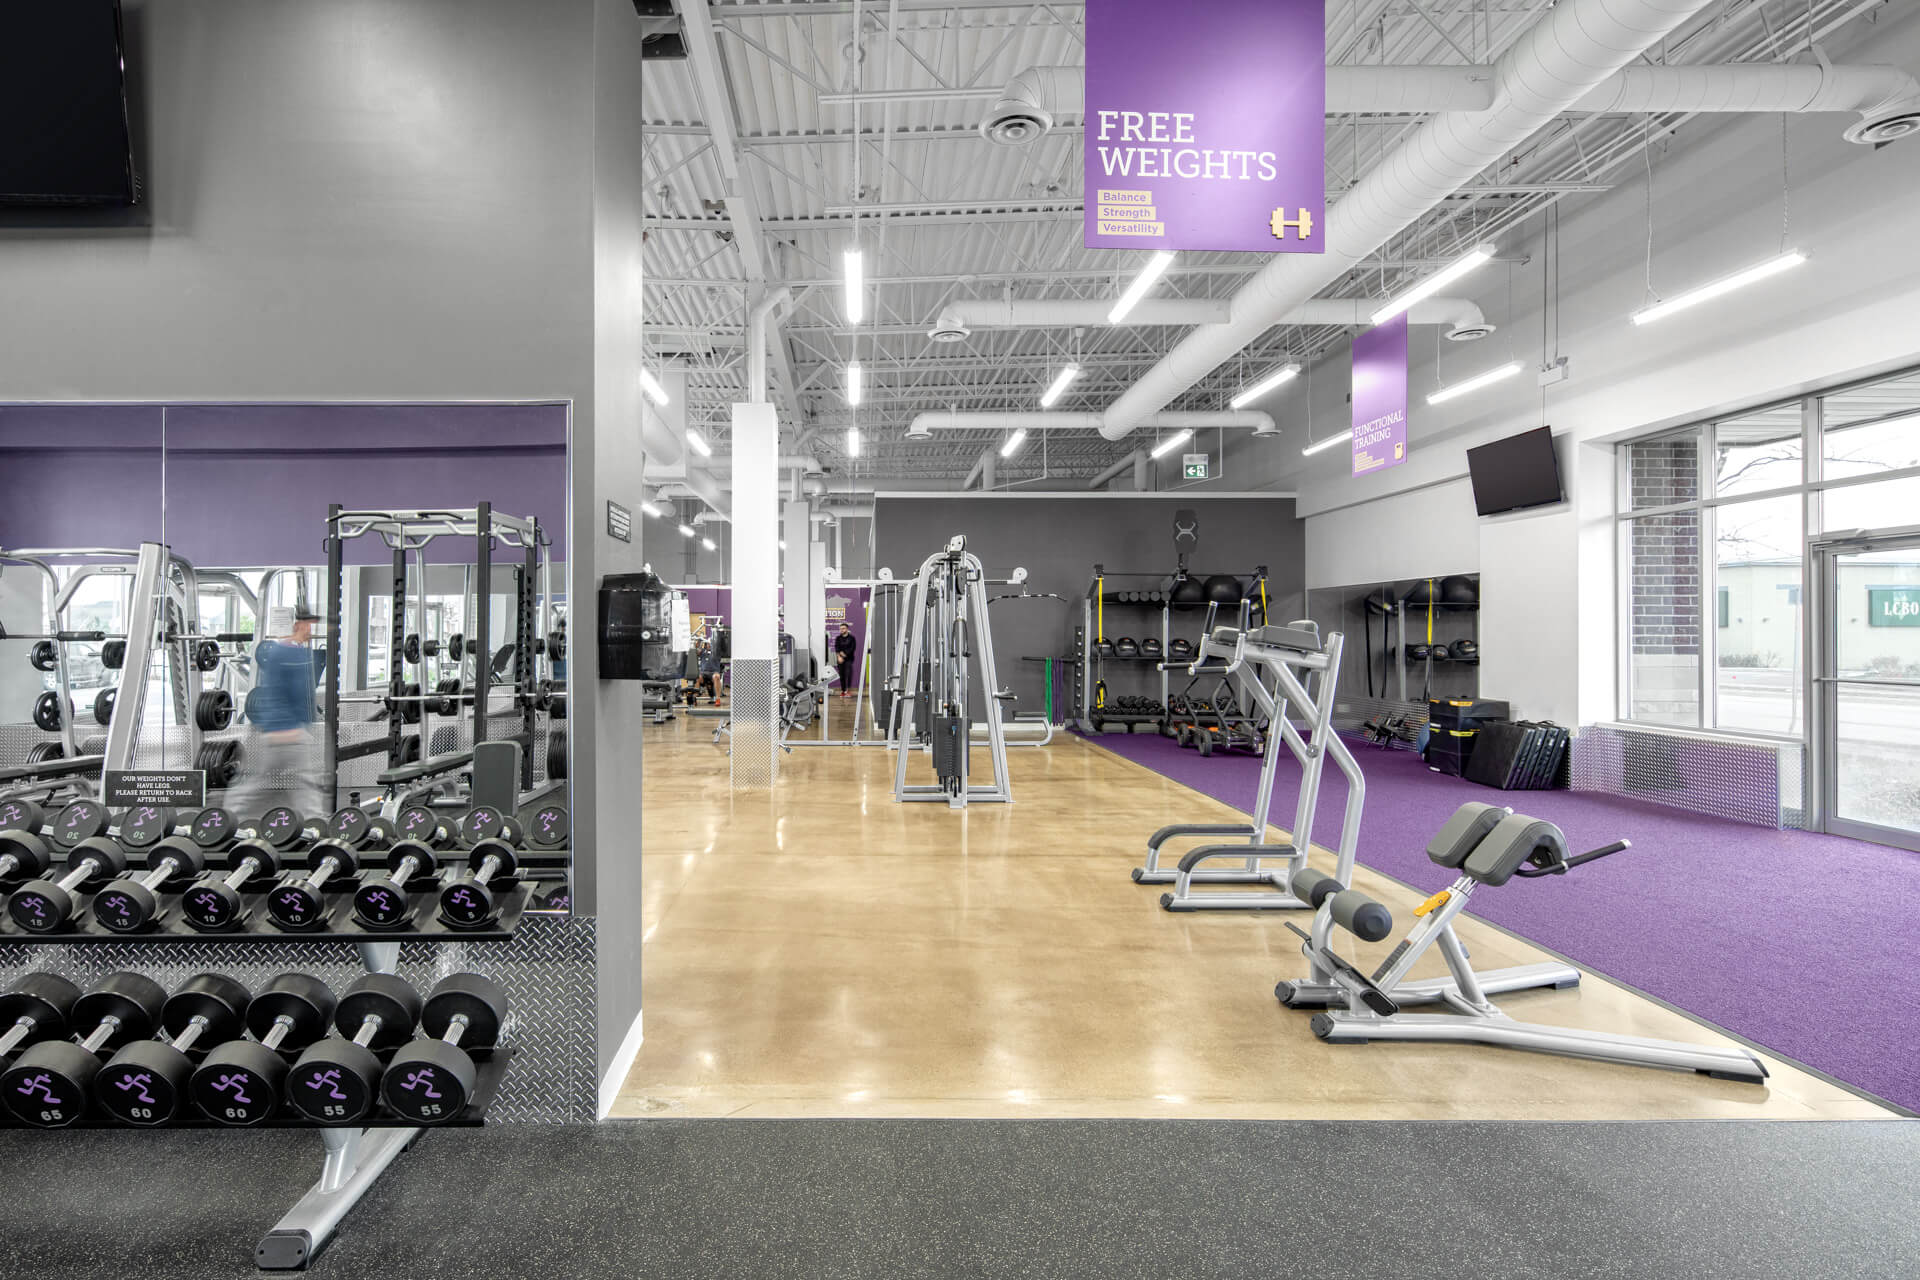  Is anytime fitness free for push your ABS